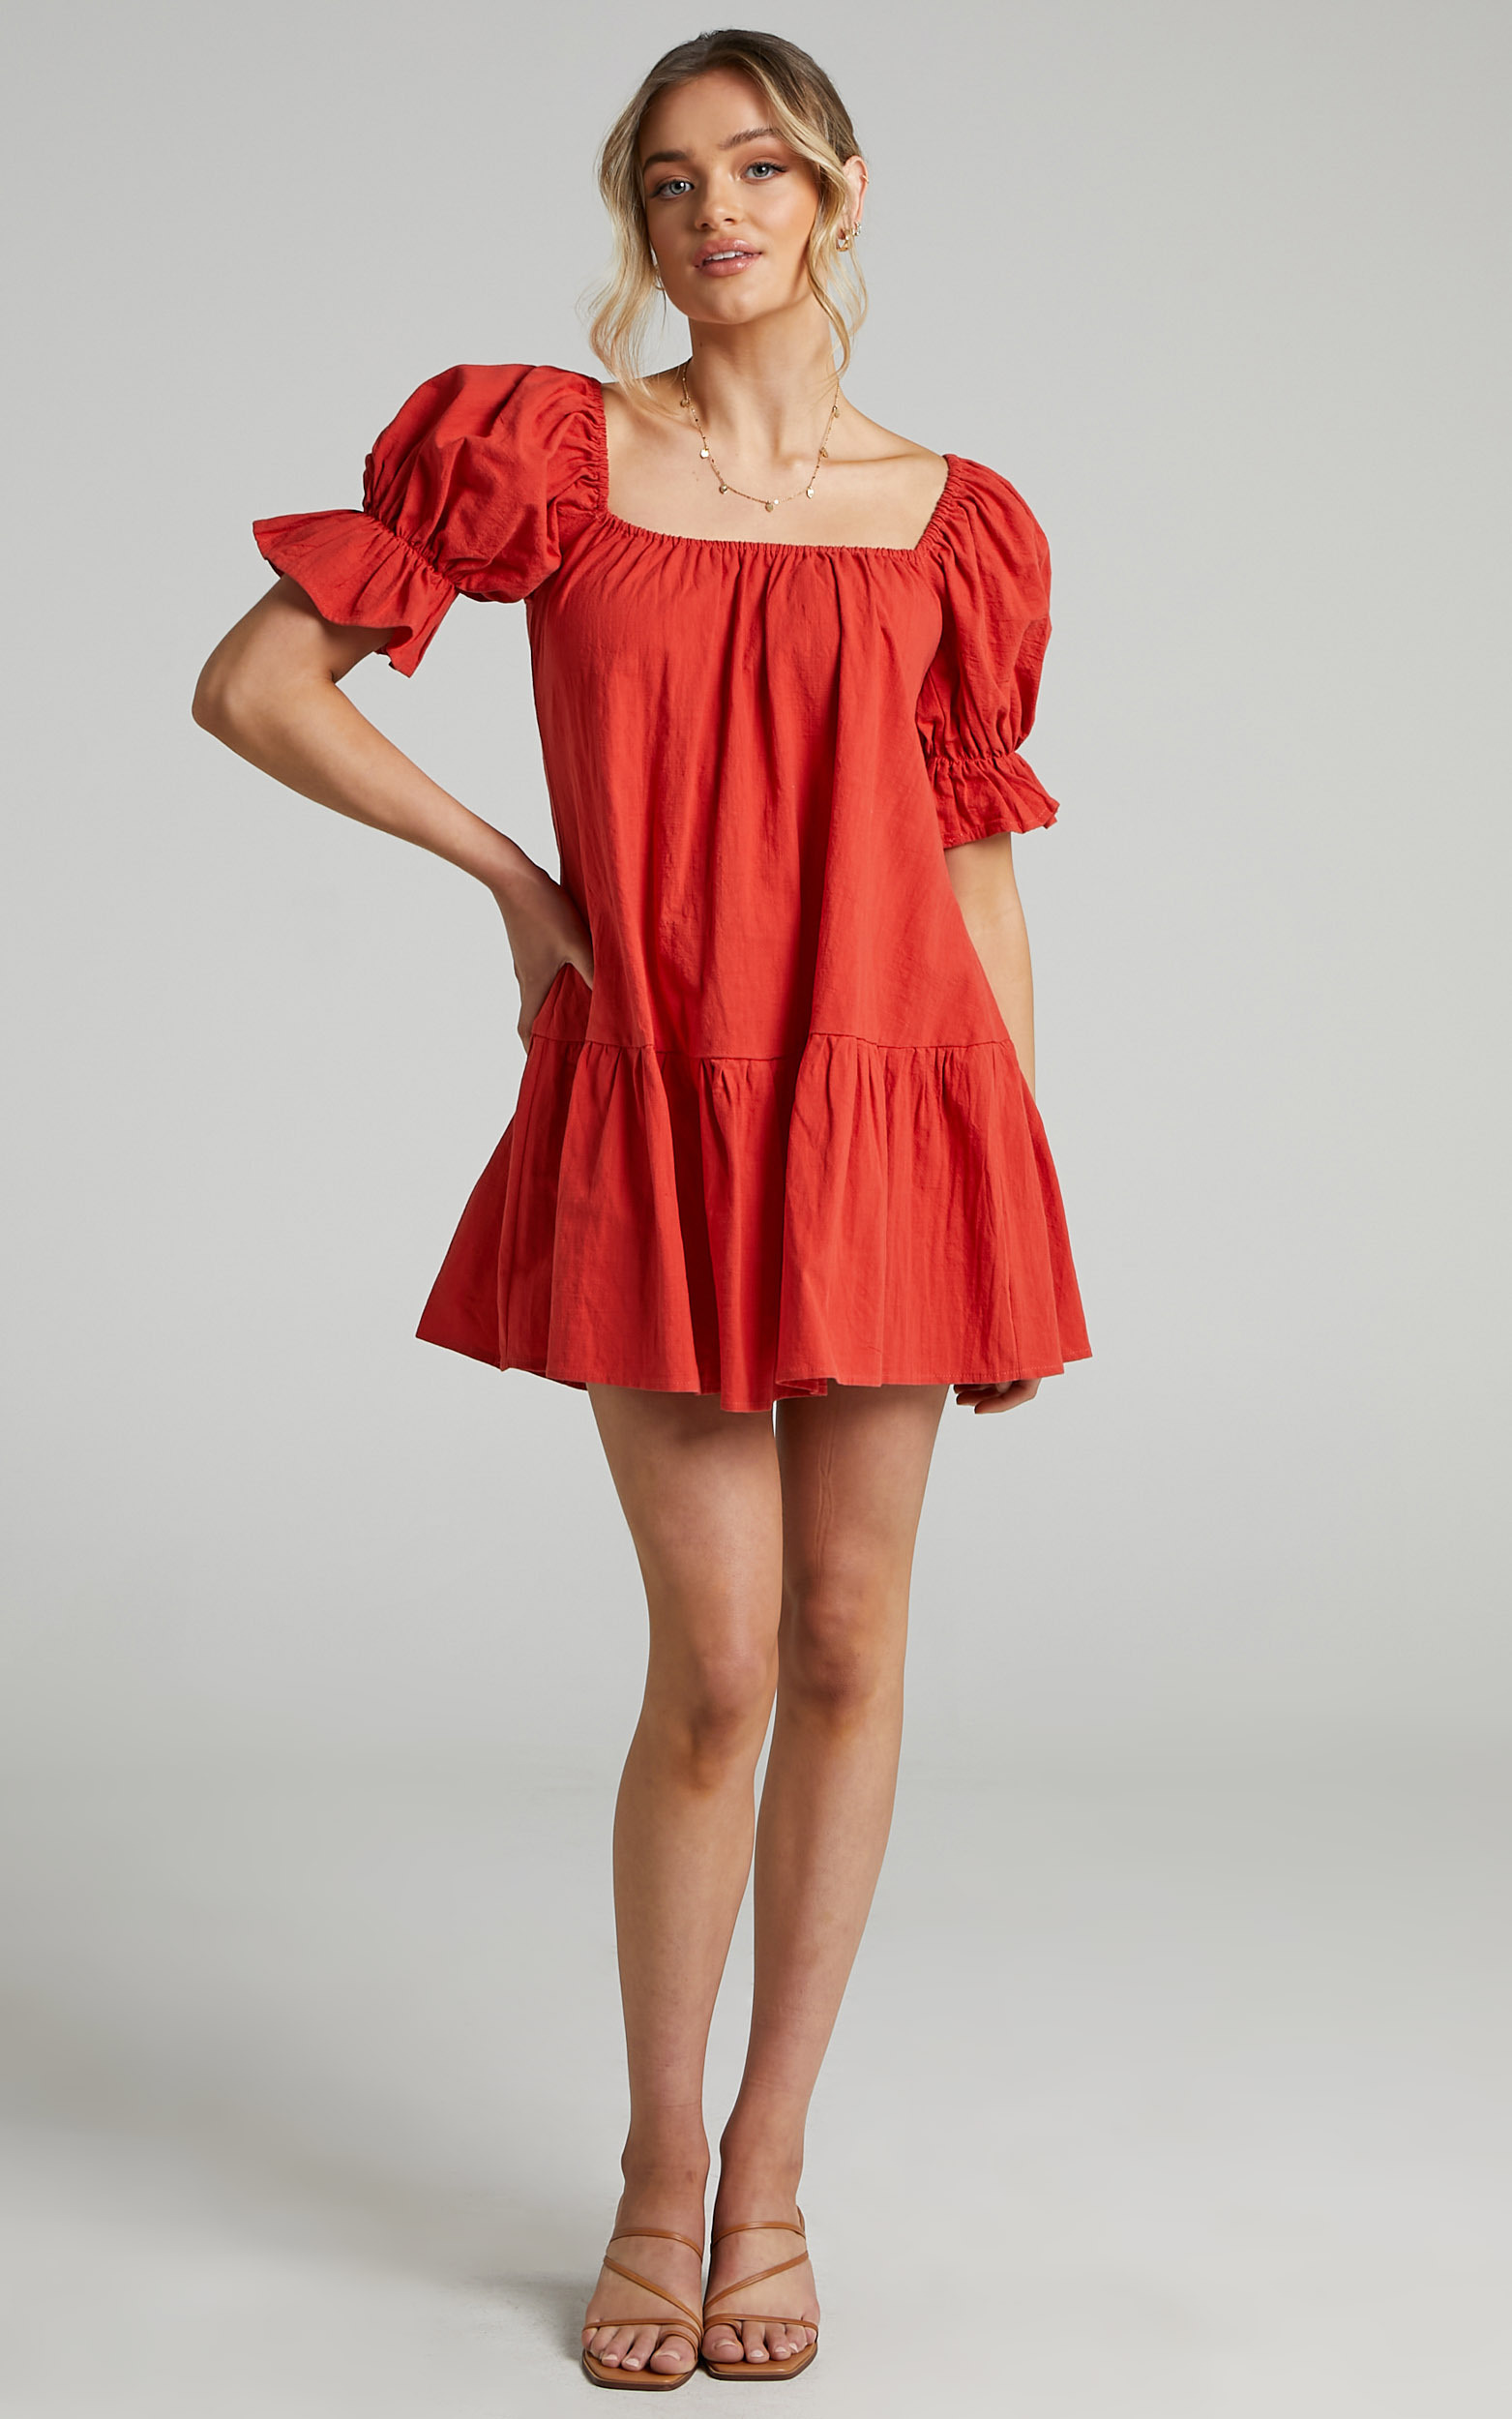 Poppy Dress in Oxy Red - 06, RED1, hi-res image number null